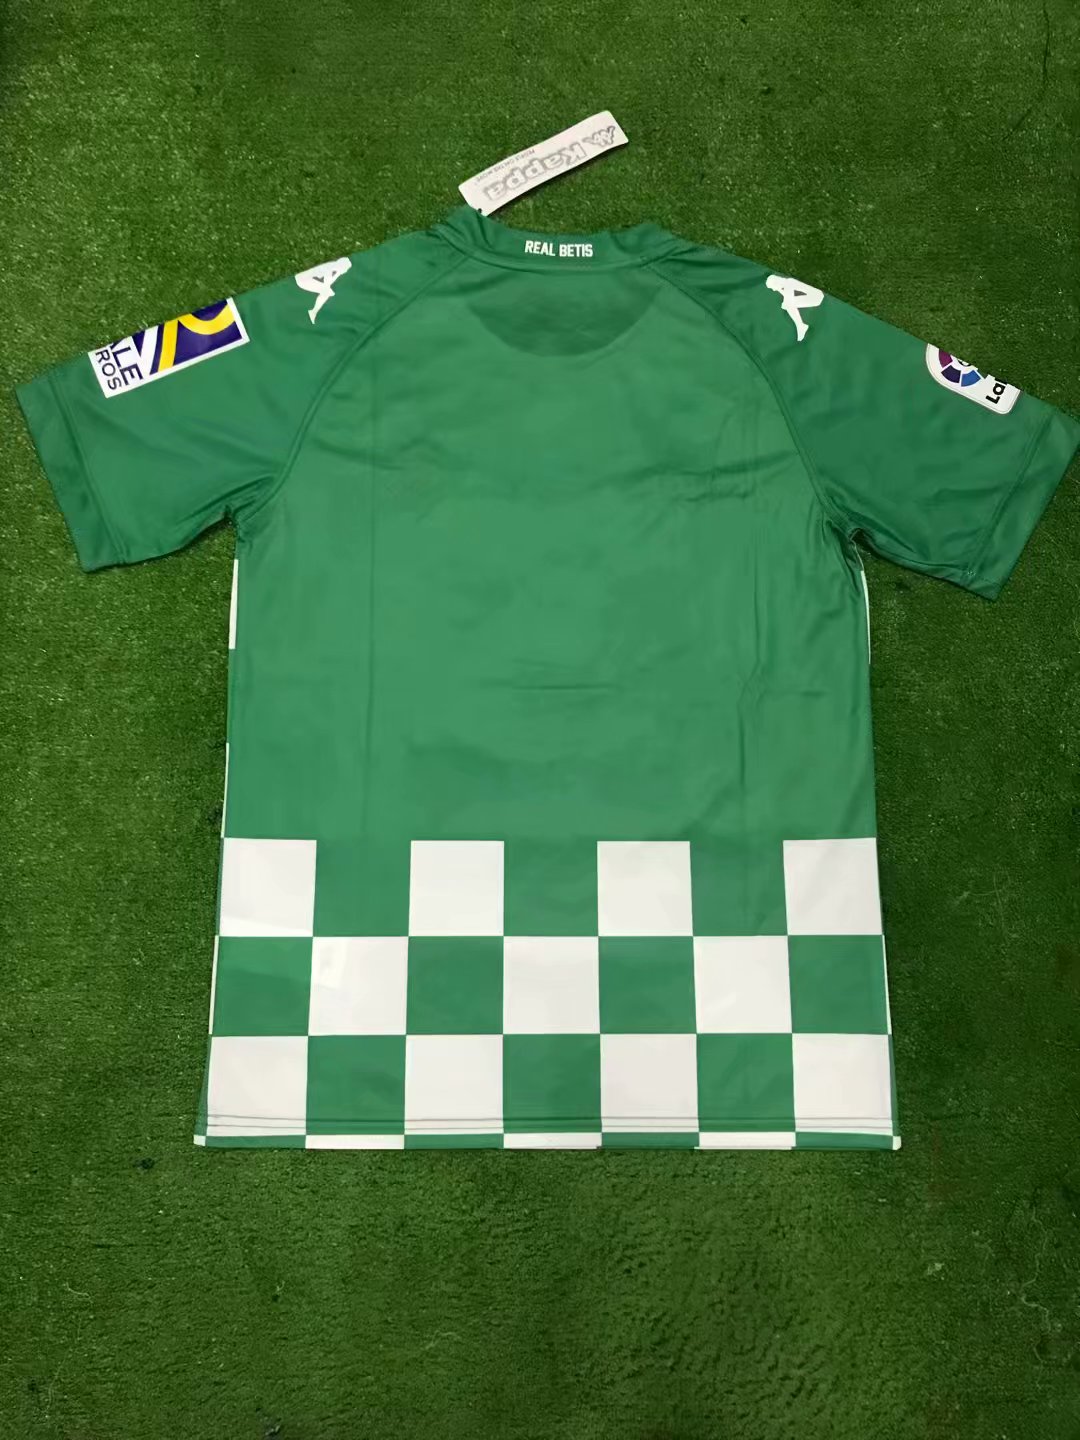 Real Betis Home 2019-20 Soccer Jersey Shirt - Click Image to Close